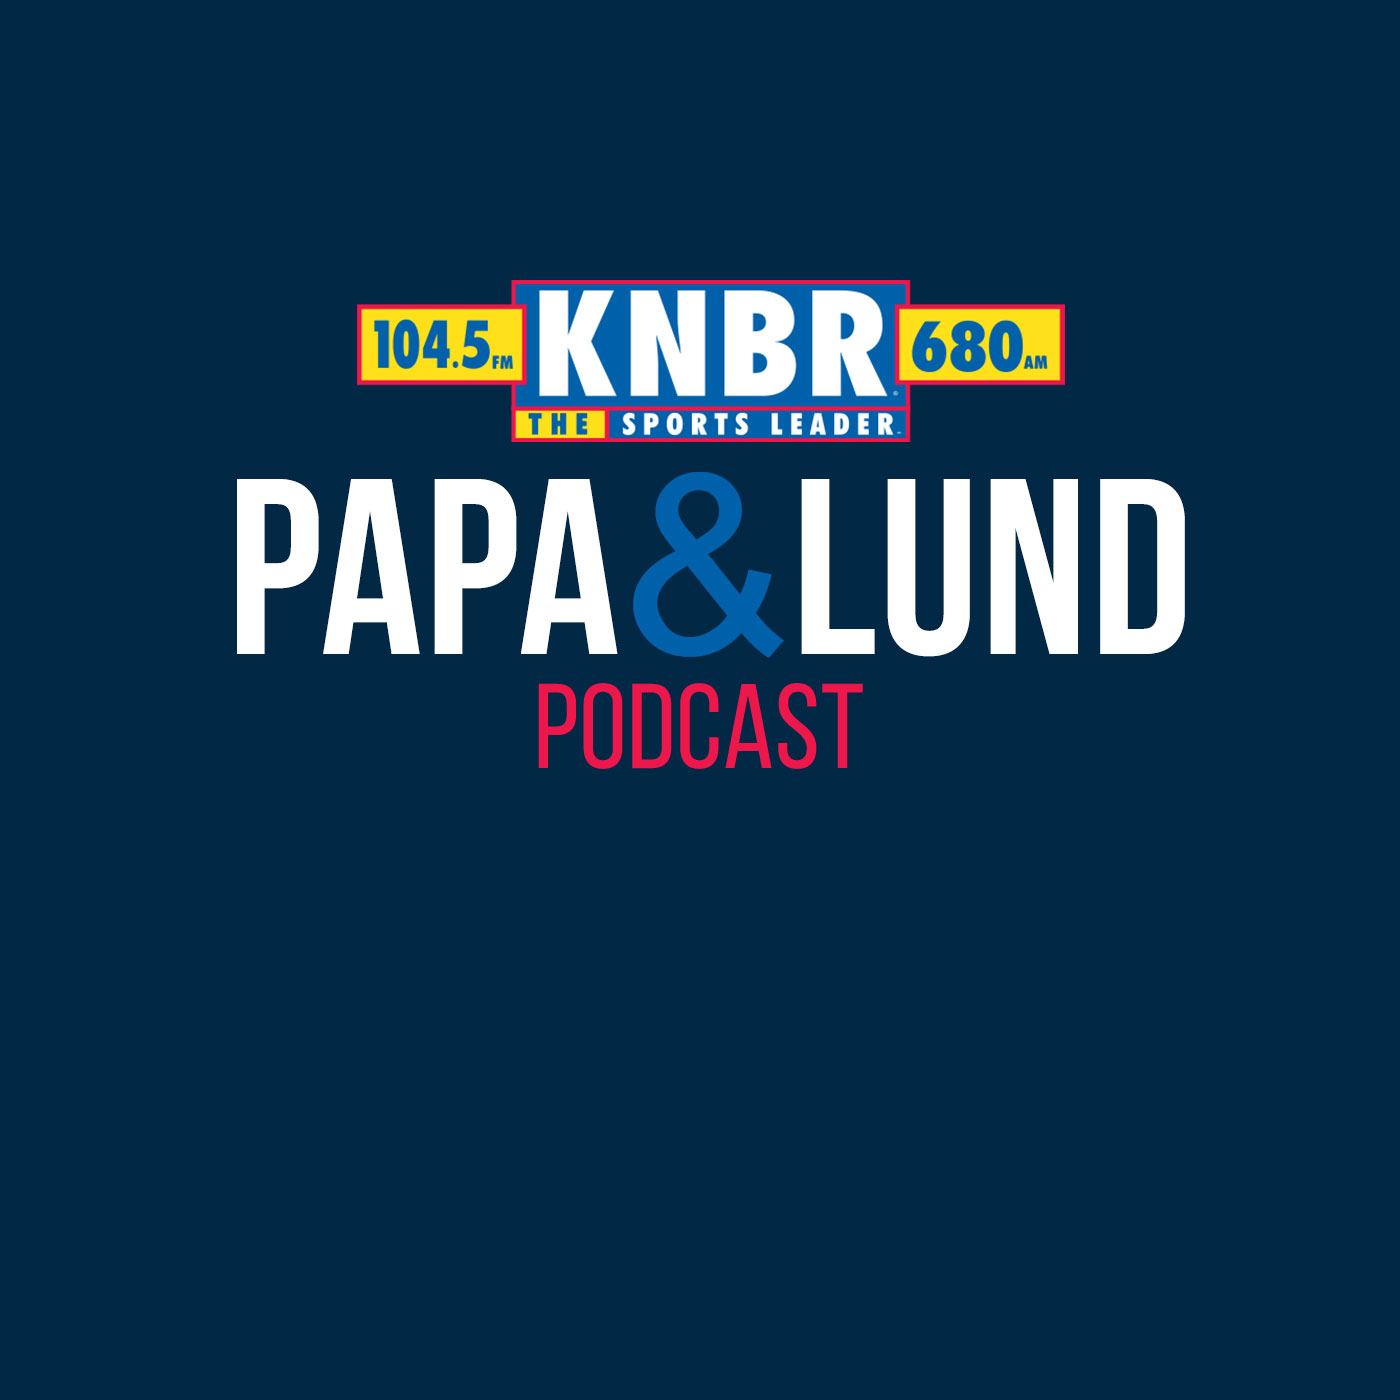 3-26 David Lombardi joins Papa & Lund to discuss the latest on Brandon Aiyuk after Kyle Shanahan spoke at the Owners Meetings